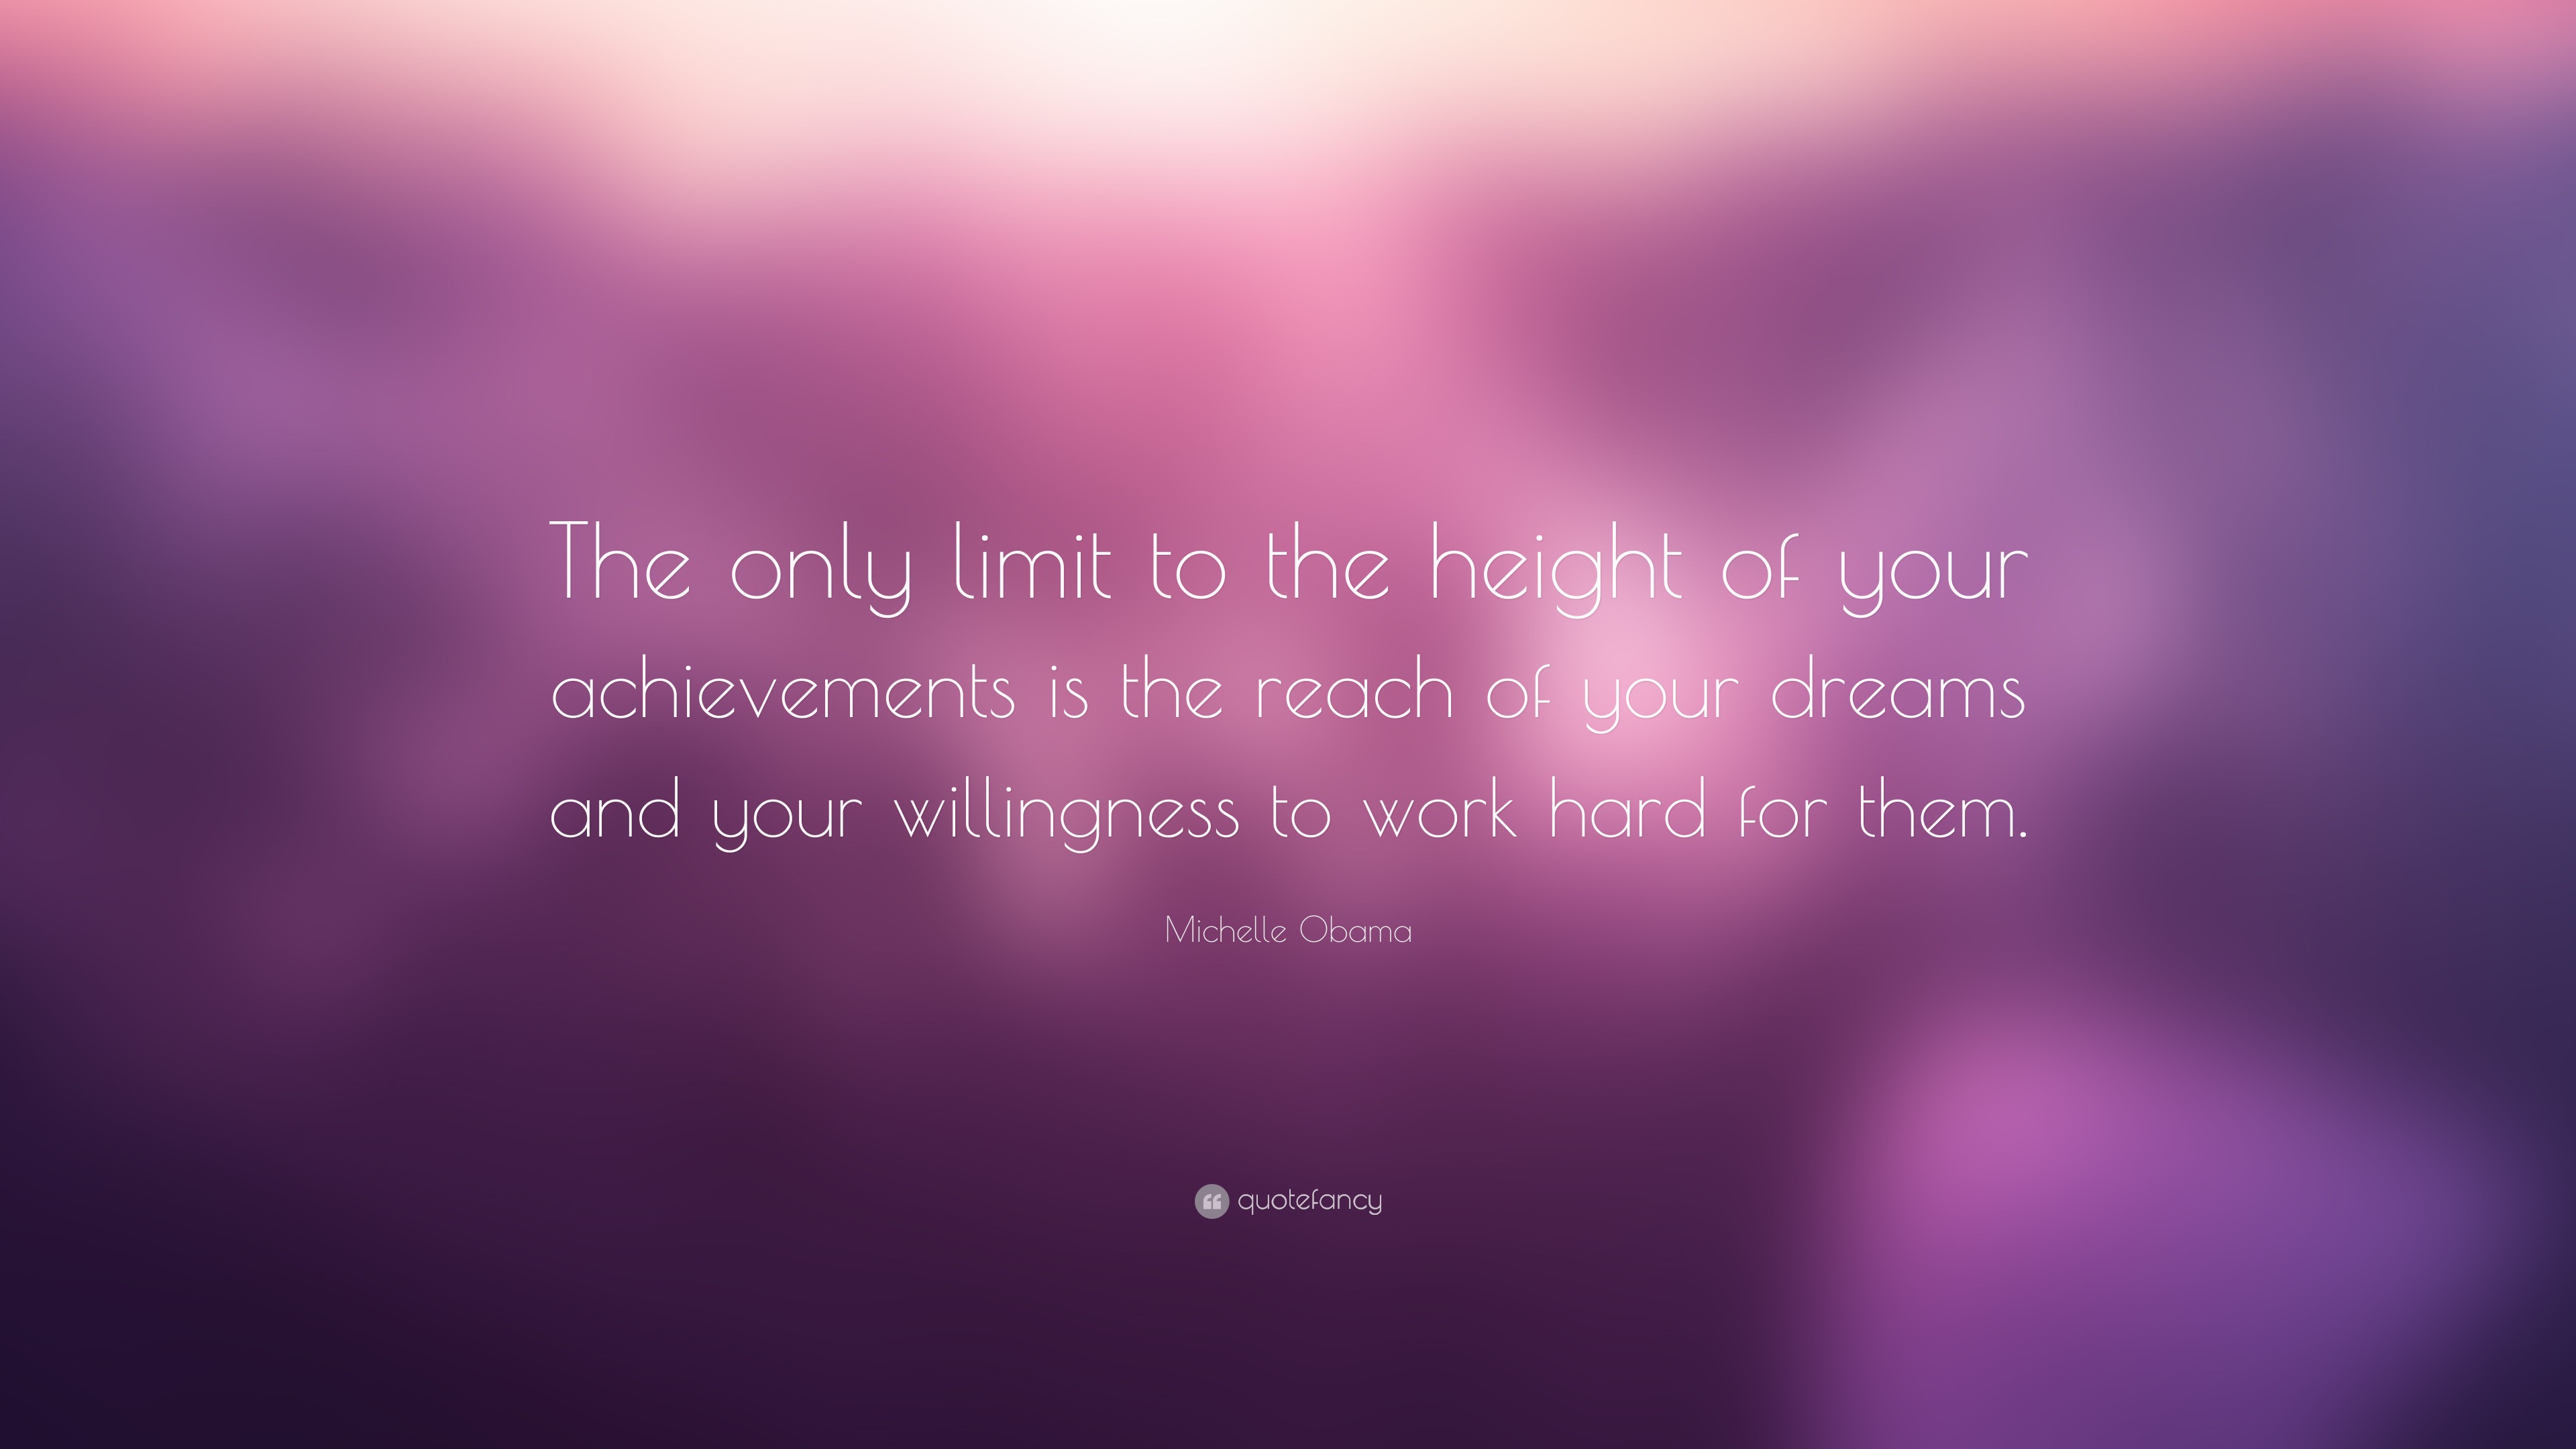 Michelle Obama Quote The Only Limit To The Height Of Your Achievements Is The Reach Of Your Dreams And Your Willingness To Work Hard For Them